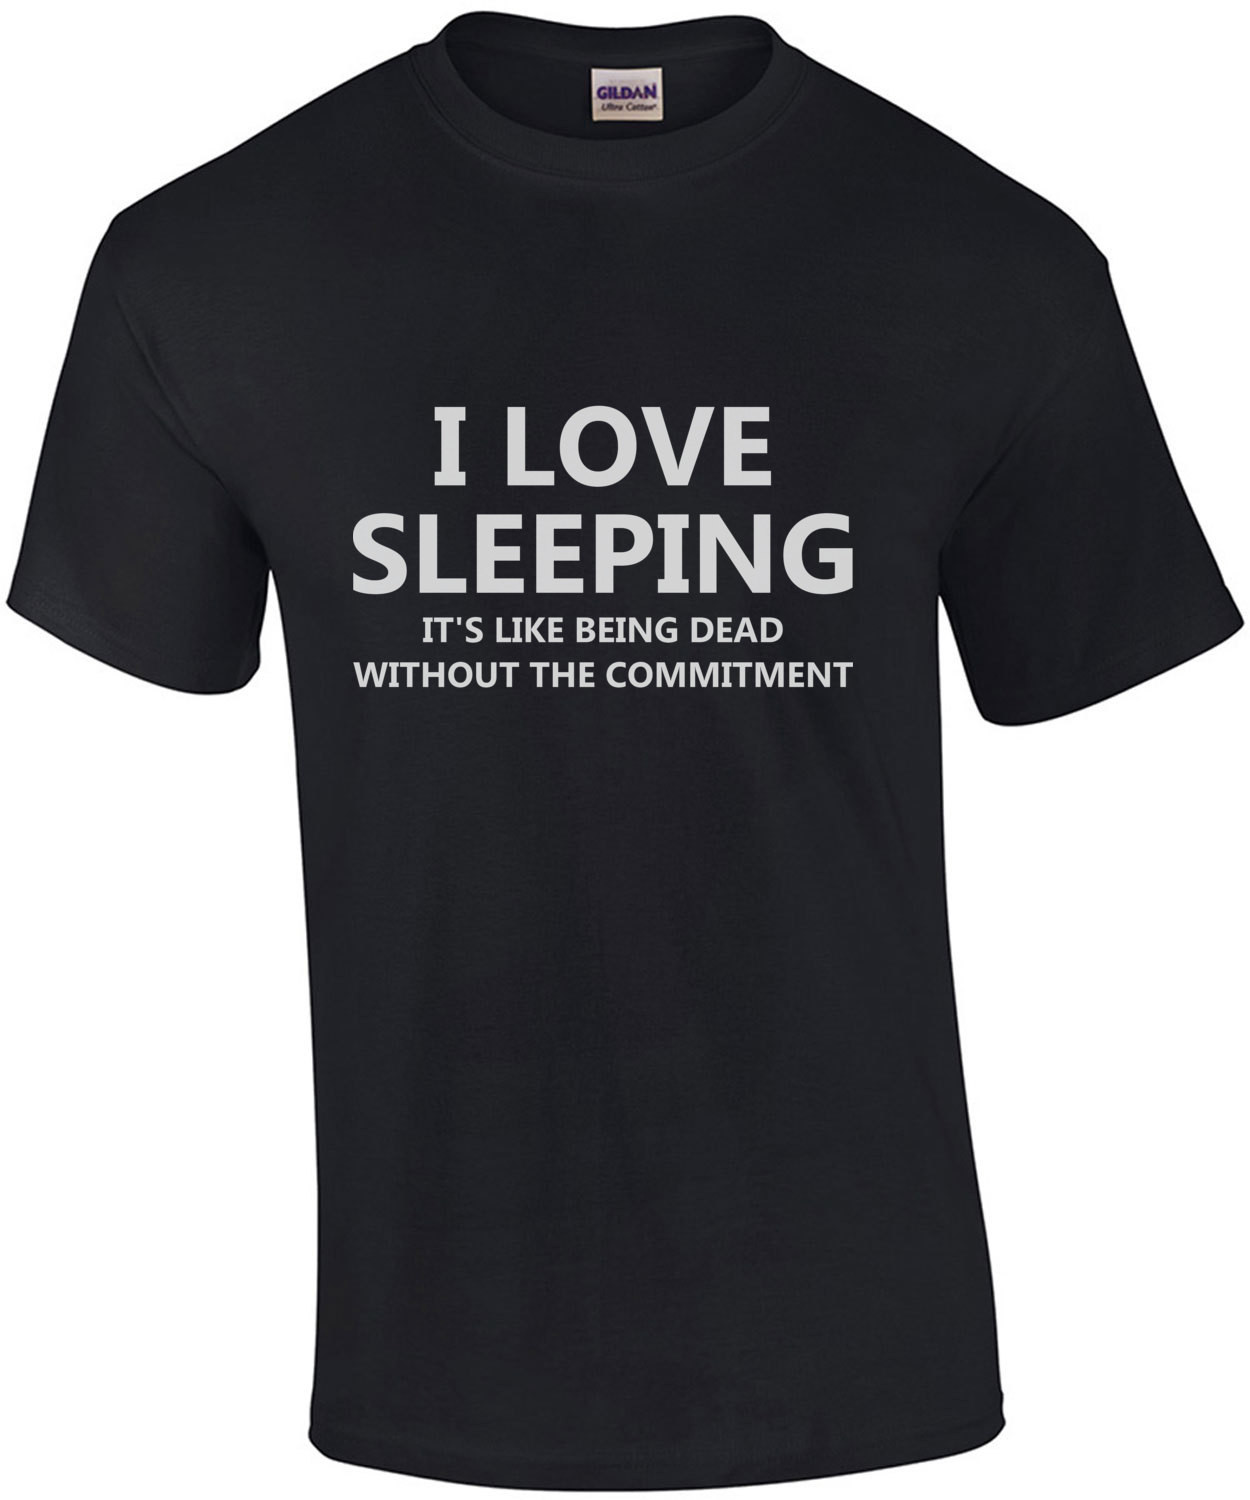 I love sleeping it's like being dead without the commitment - funny sarcastic t-shirt